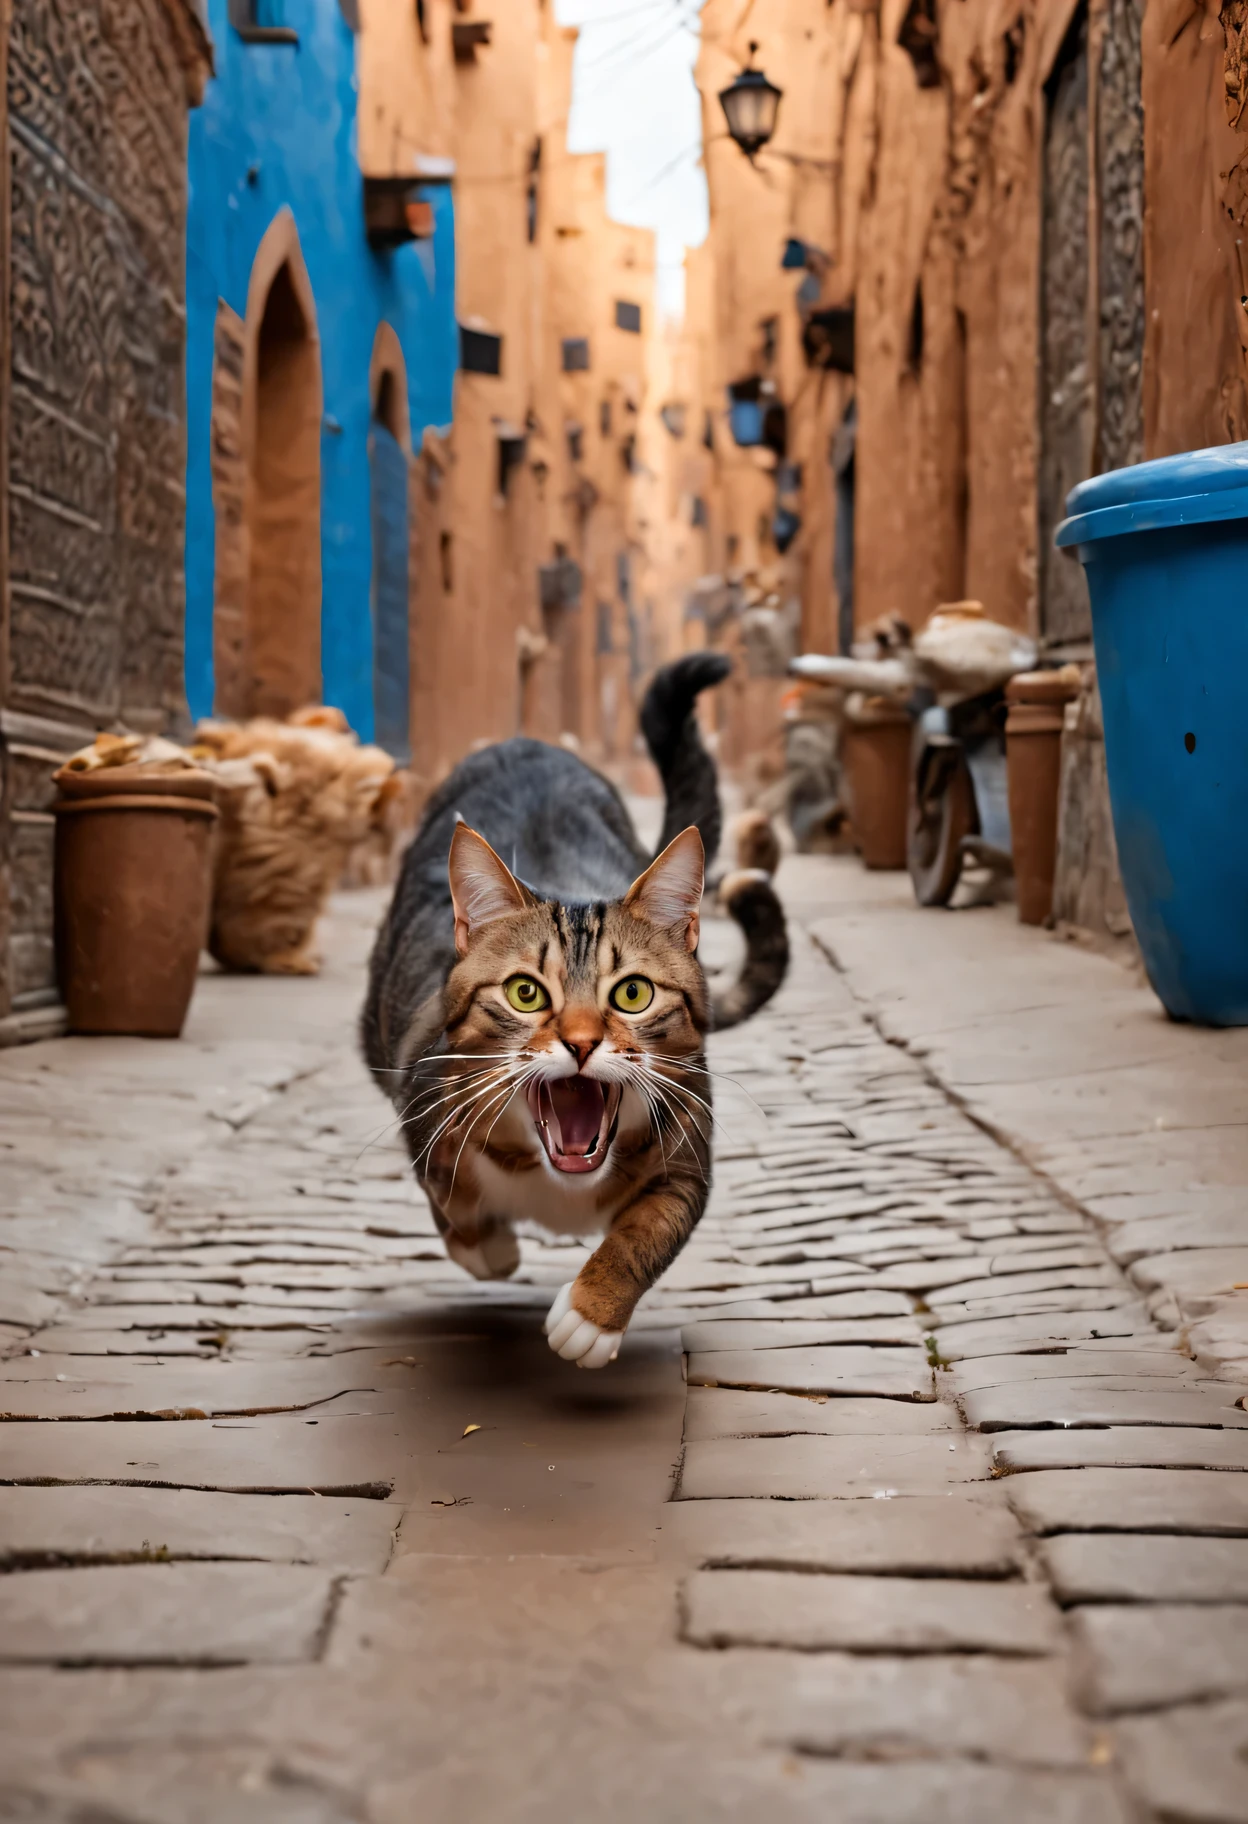 there is a chat that is running down the street with Moroccan people chasing it, awesome chat, Photo extrêmement réaliste, Tom et Jerry dans la vraie vie, happy chat, chat attacking Marrakech, funny chat, running chat, !!! chat!!!, !!!! chat!!!!, Photo très réaliste, Image réelle, image ultra réaliste, photo hyper réelle, sardine volée dans la bouche, image hyperréaliste